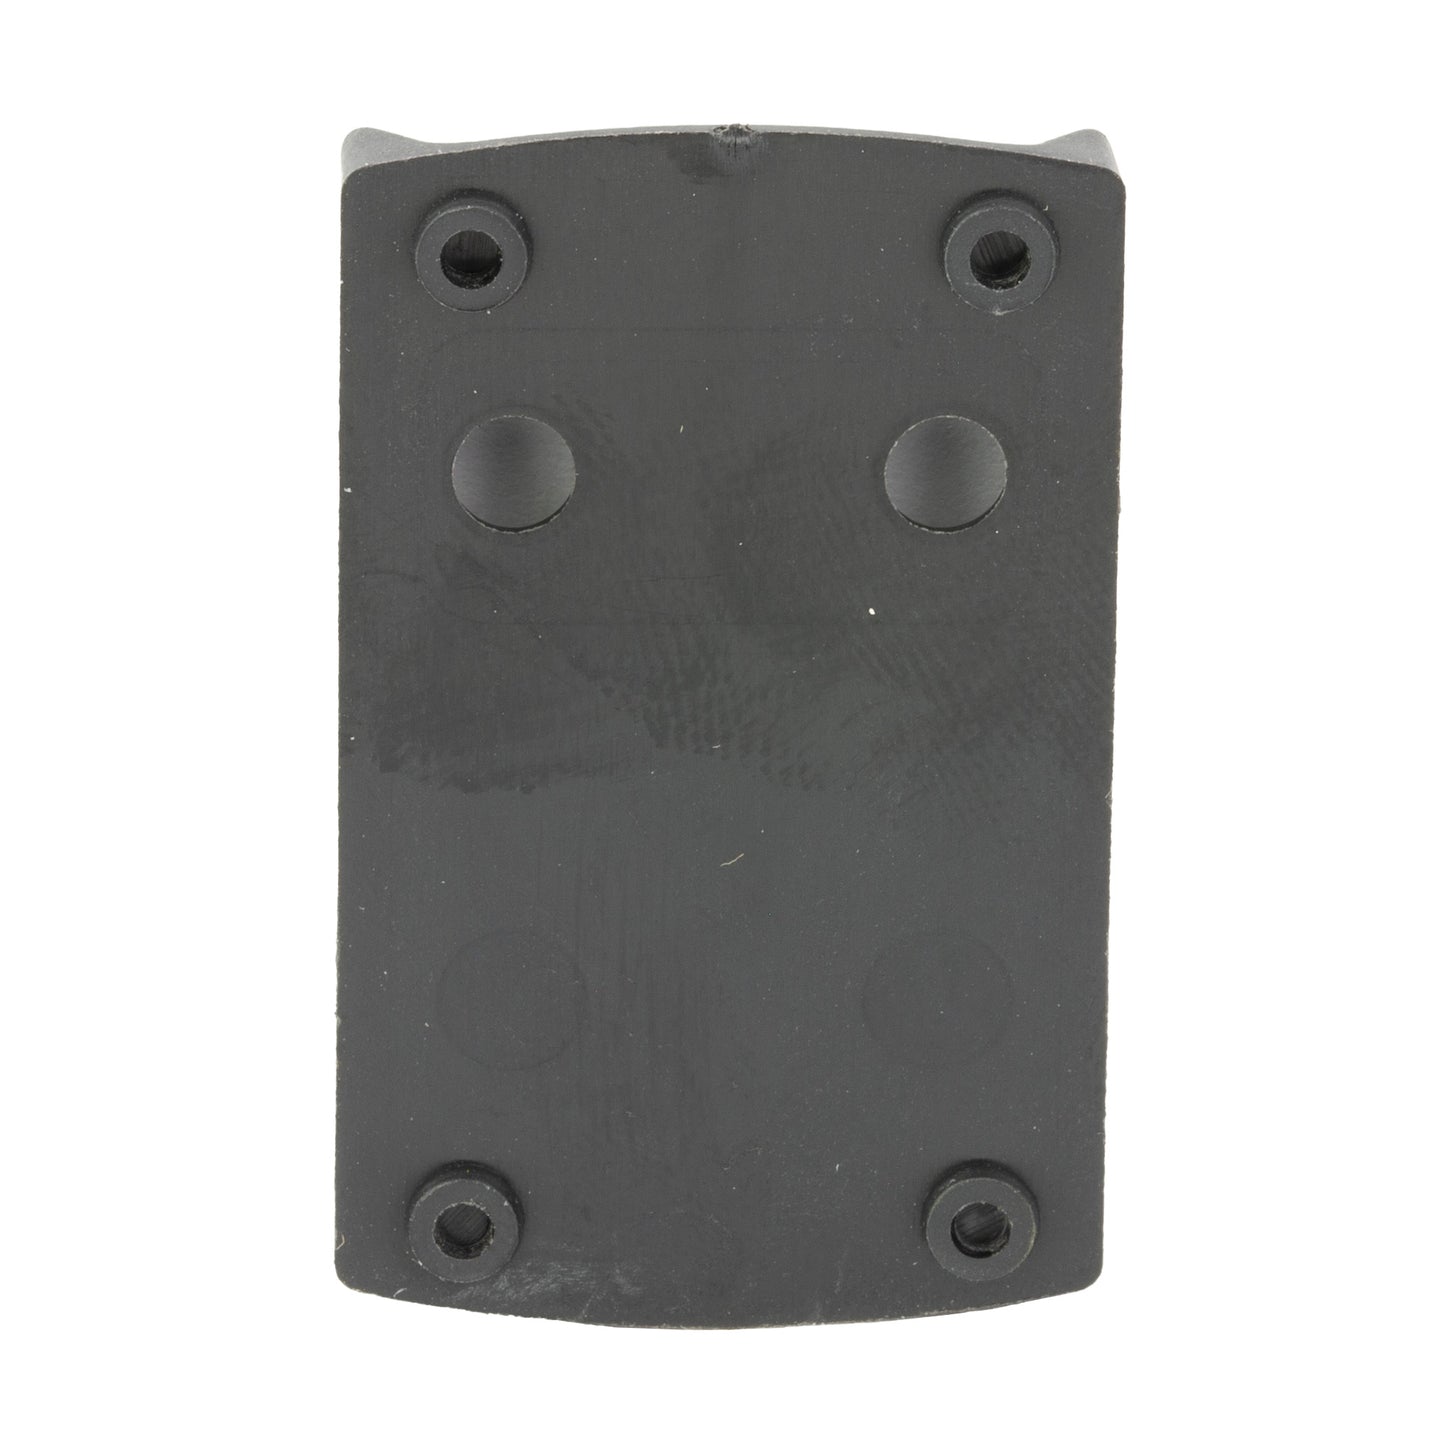 Shield Sights Low Pro Slide Mounting Plate Fits HK USP MNT-USP-SMS-RMS - California Shooting Supplies